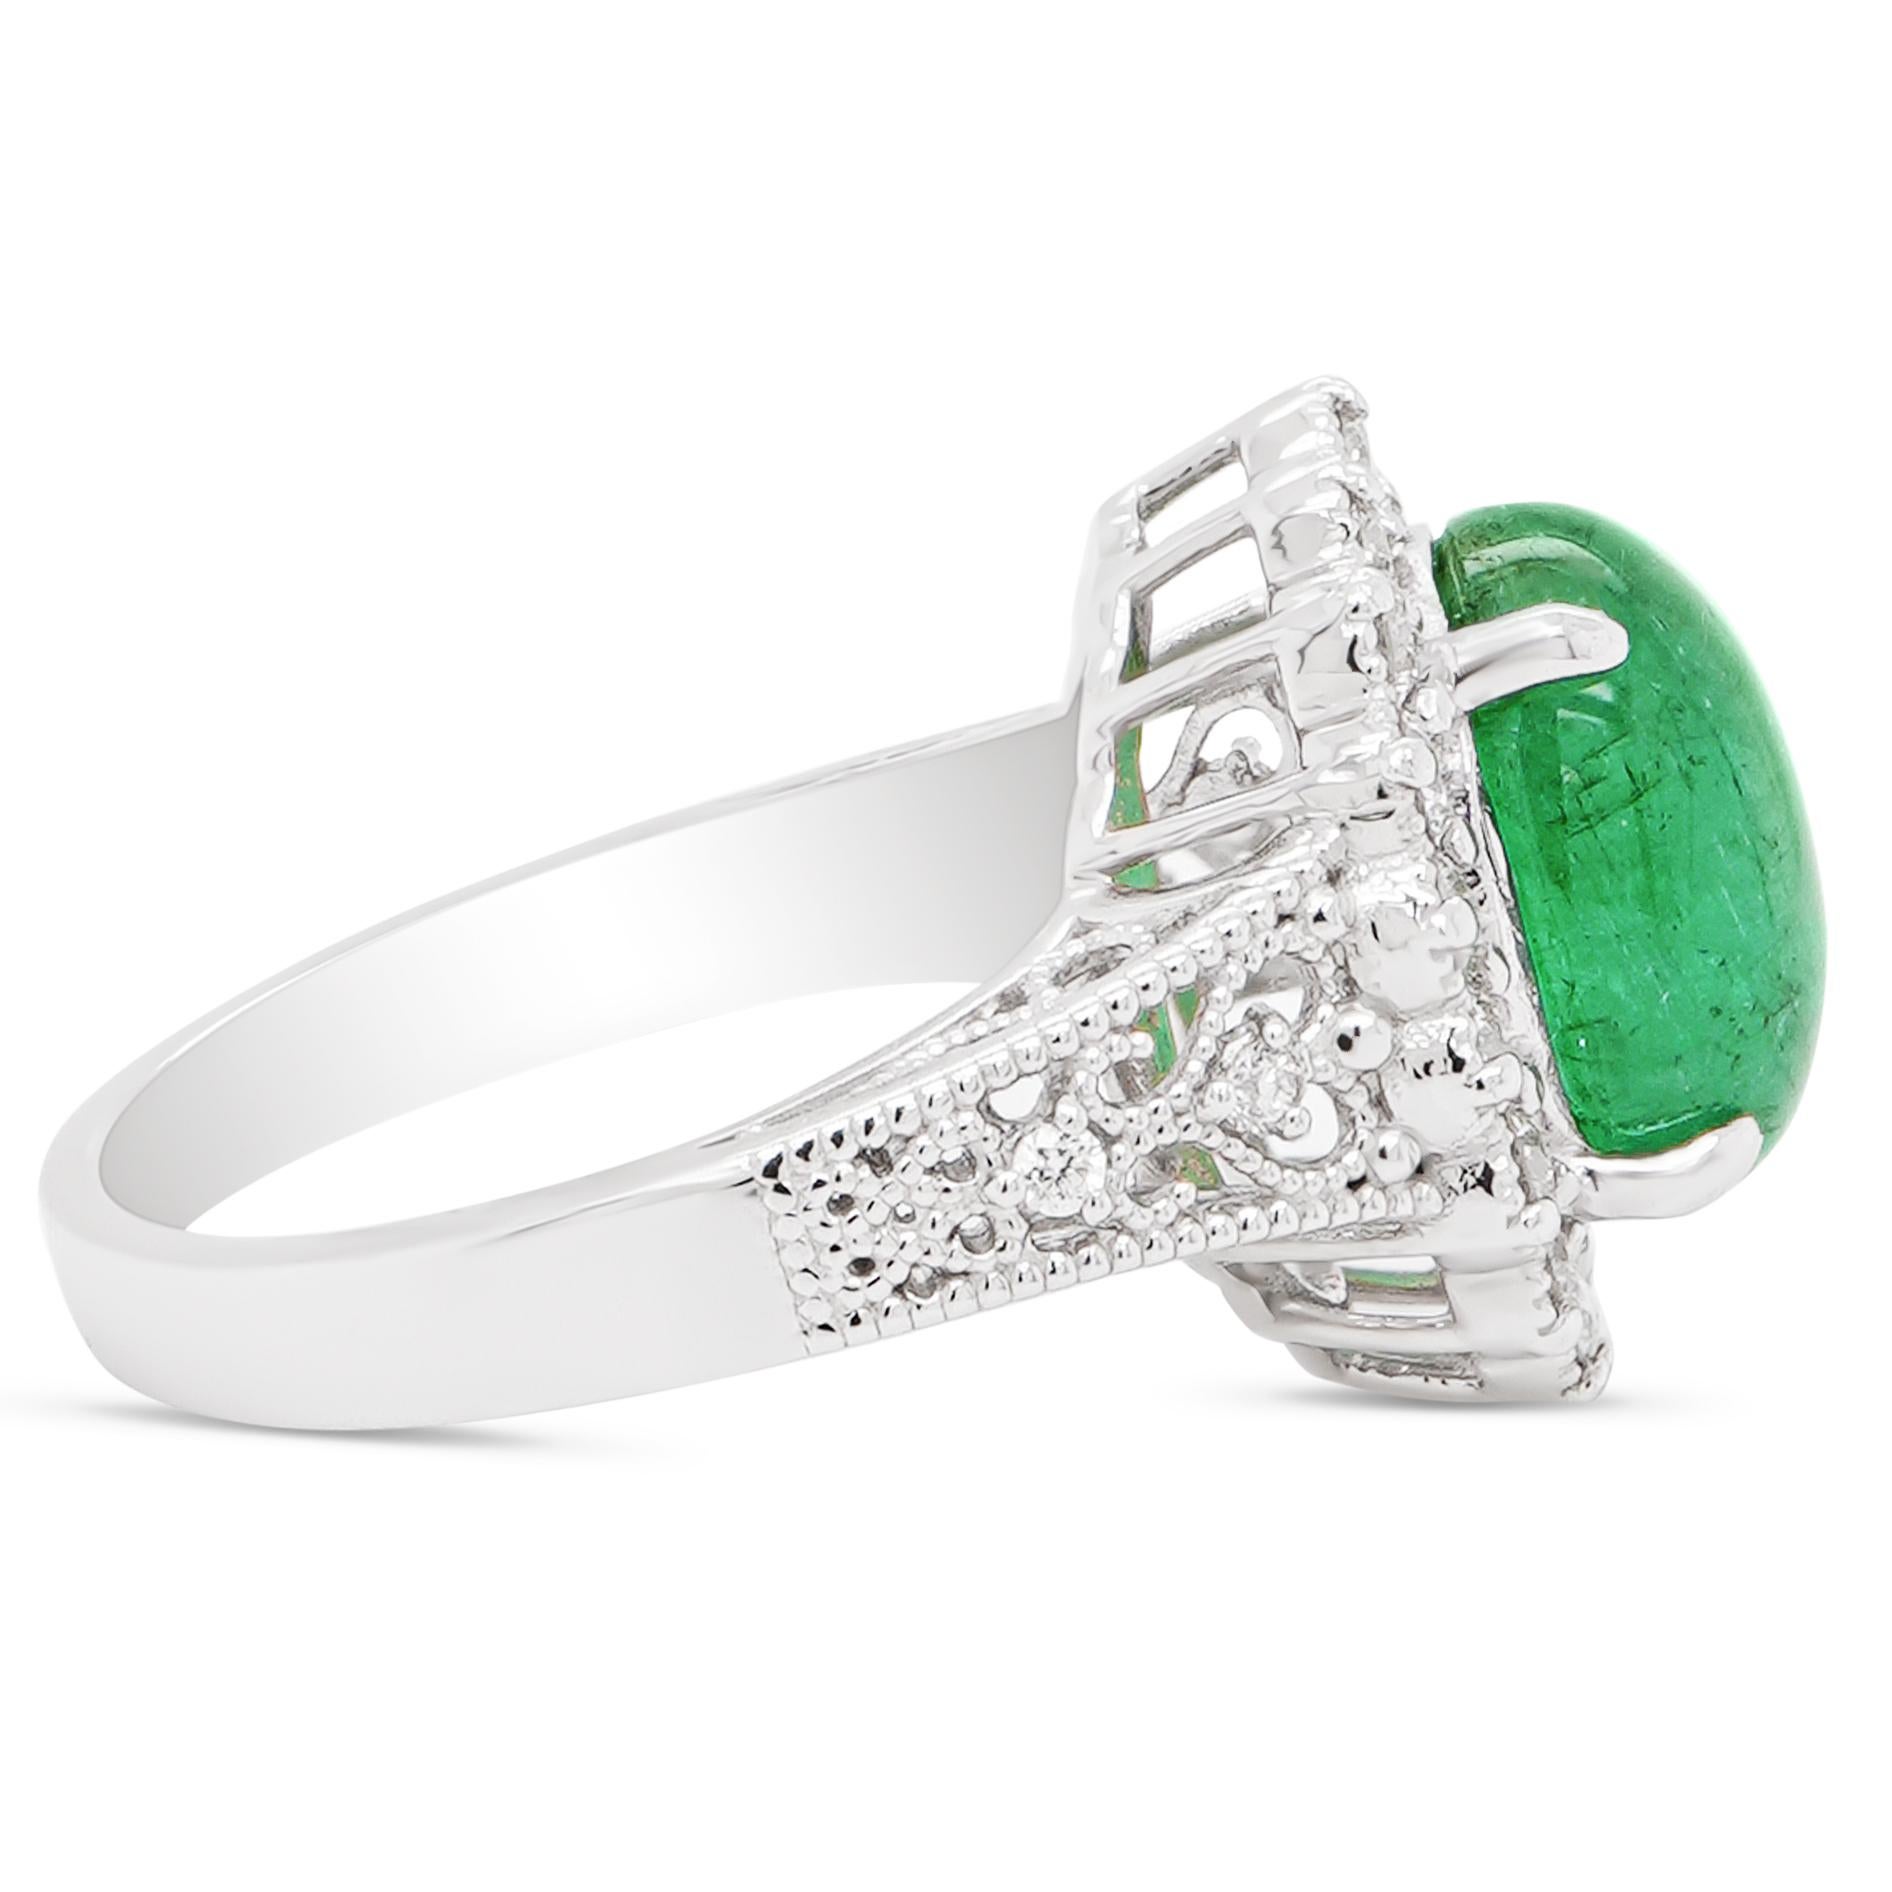 Colombian emeralds tend to have more trace amounts of chromium (called an inclusion) in relation to other emeralds, which typically gives them the pure, bright, saturated green so beloved in these timeless gemstones. Their impressive color stands